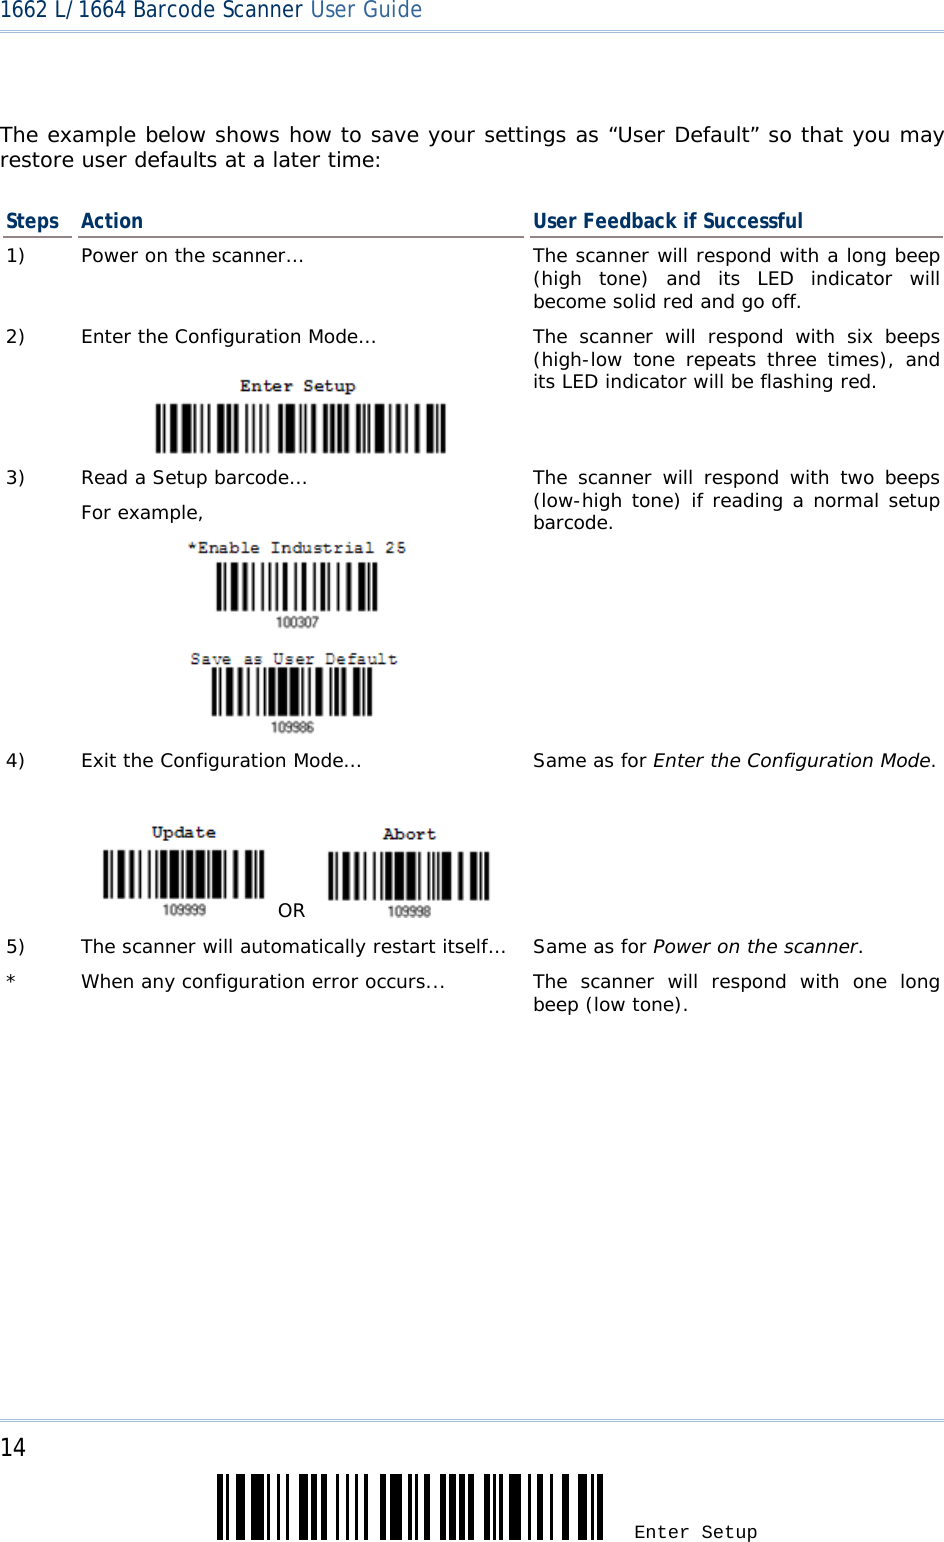 14 Enter Setup 1662 L/1664 Barcode Scanner User Guide   The example below shows how to save your settings as “User Default” so that you may restore user defaults at a later time: Steps  Action  User Feedback if Successful 1)  Power on the scanner… The scanner will respond with a long beep (high tone) and its LED indicator will become solid red and go off. 2)  Enter the Configuration Mode…  The scanner will respond with six beeps (high-low tone repeats three times), and its LED indicator will be flashing red.  3)  Read a Setup barcode… For example,               The scanner will respond with two beeps (low-high tone) if reading a normal setup barcode. 4)  Exit the Configuration Mode…      OR    Same as for Enter the Configuration Mode. 5)  The scanner will automatically restart itself…  Same as for Power on the scanner. *  When any configuration error occurs...  The scanner will respond with one long beep (low tone).   